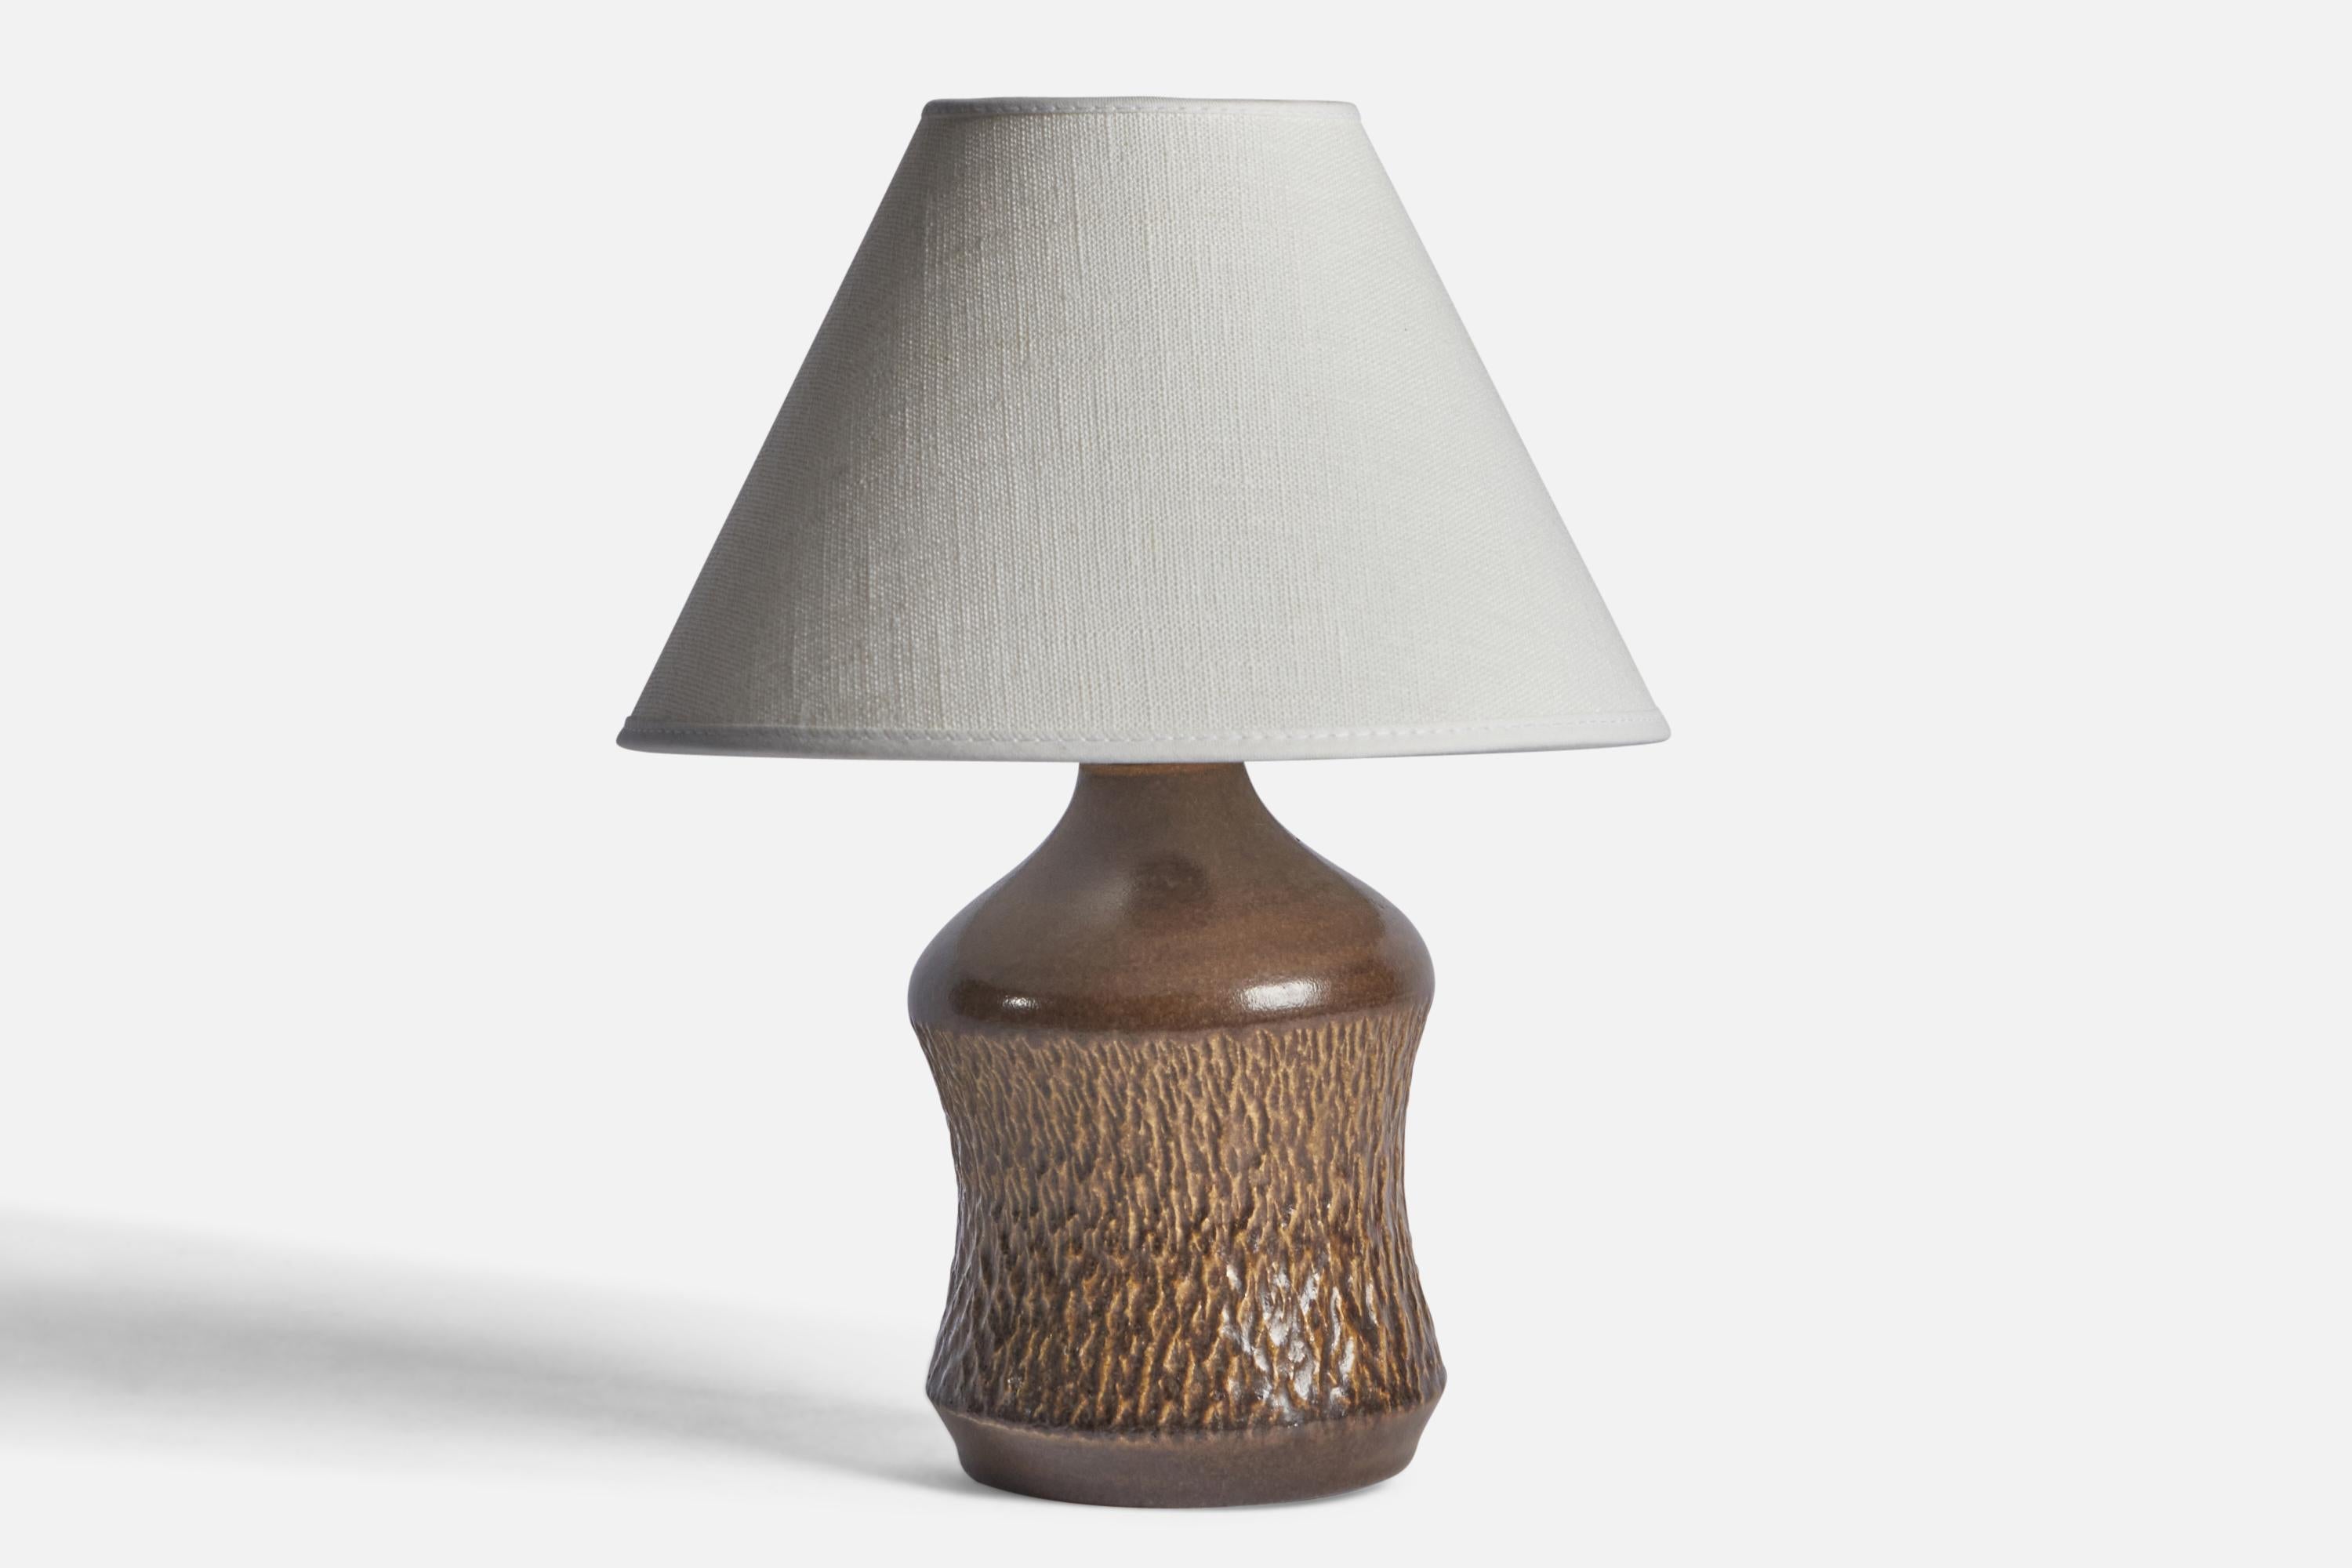 A brown-glazed stoneware table lamp designed and produced by Henry Brandi, Vejbystrand, Sweden, c. 1960s.

Dimensions of Lamp (inches): 8” H x 4” Diameter
Dimensions of Shade (inches): 3” Top Diameter x 8” Bottom Diameter x 5” H 
Dimensions of Lamp